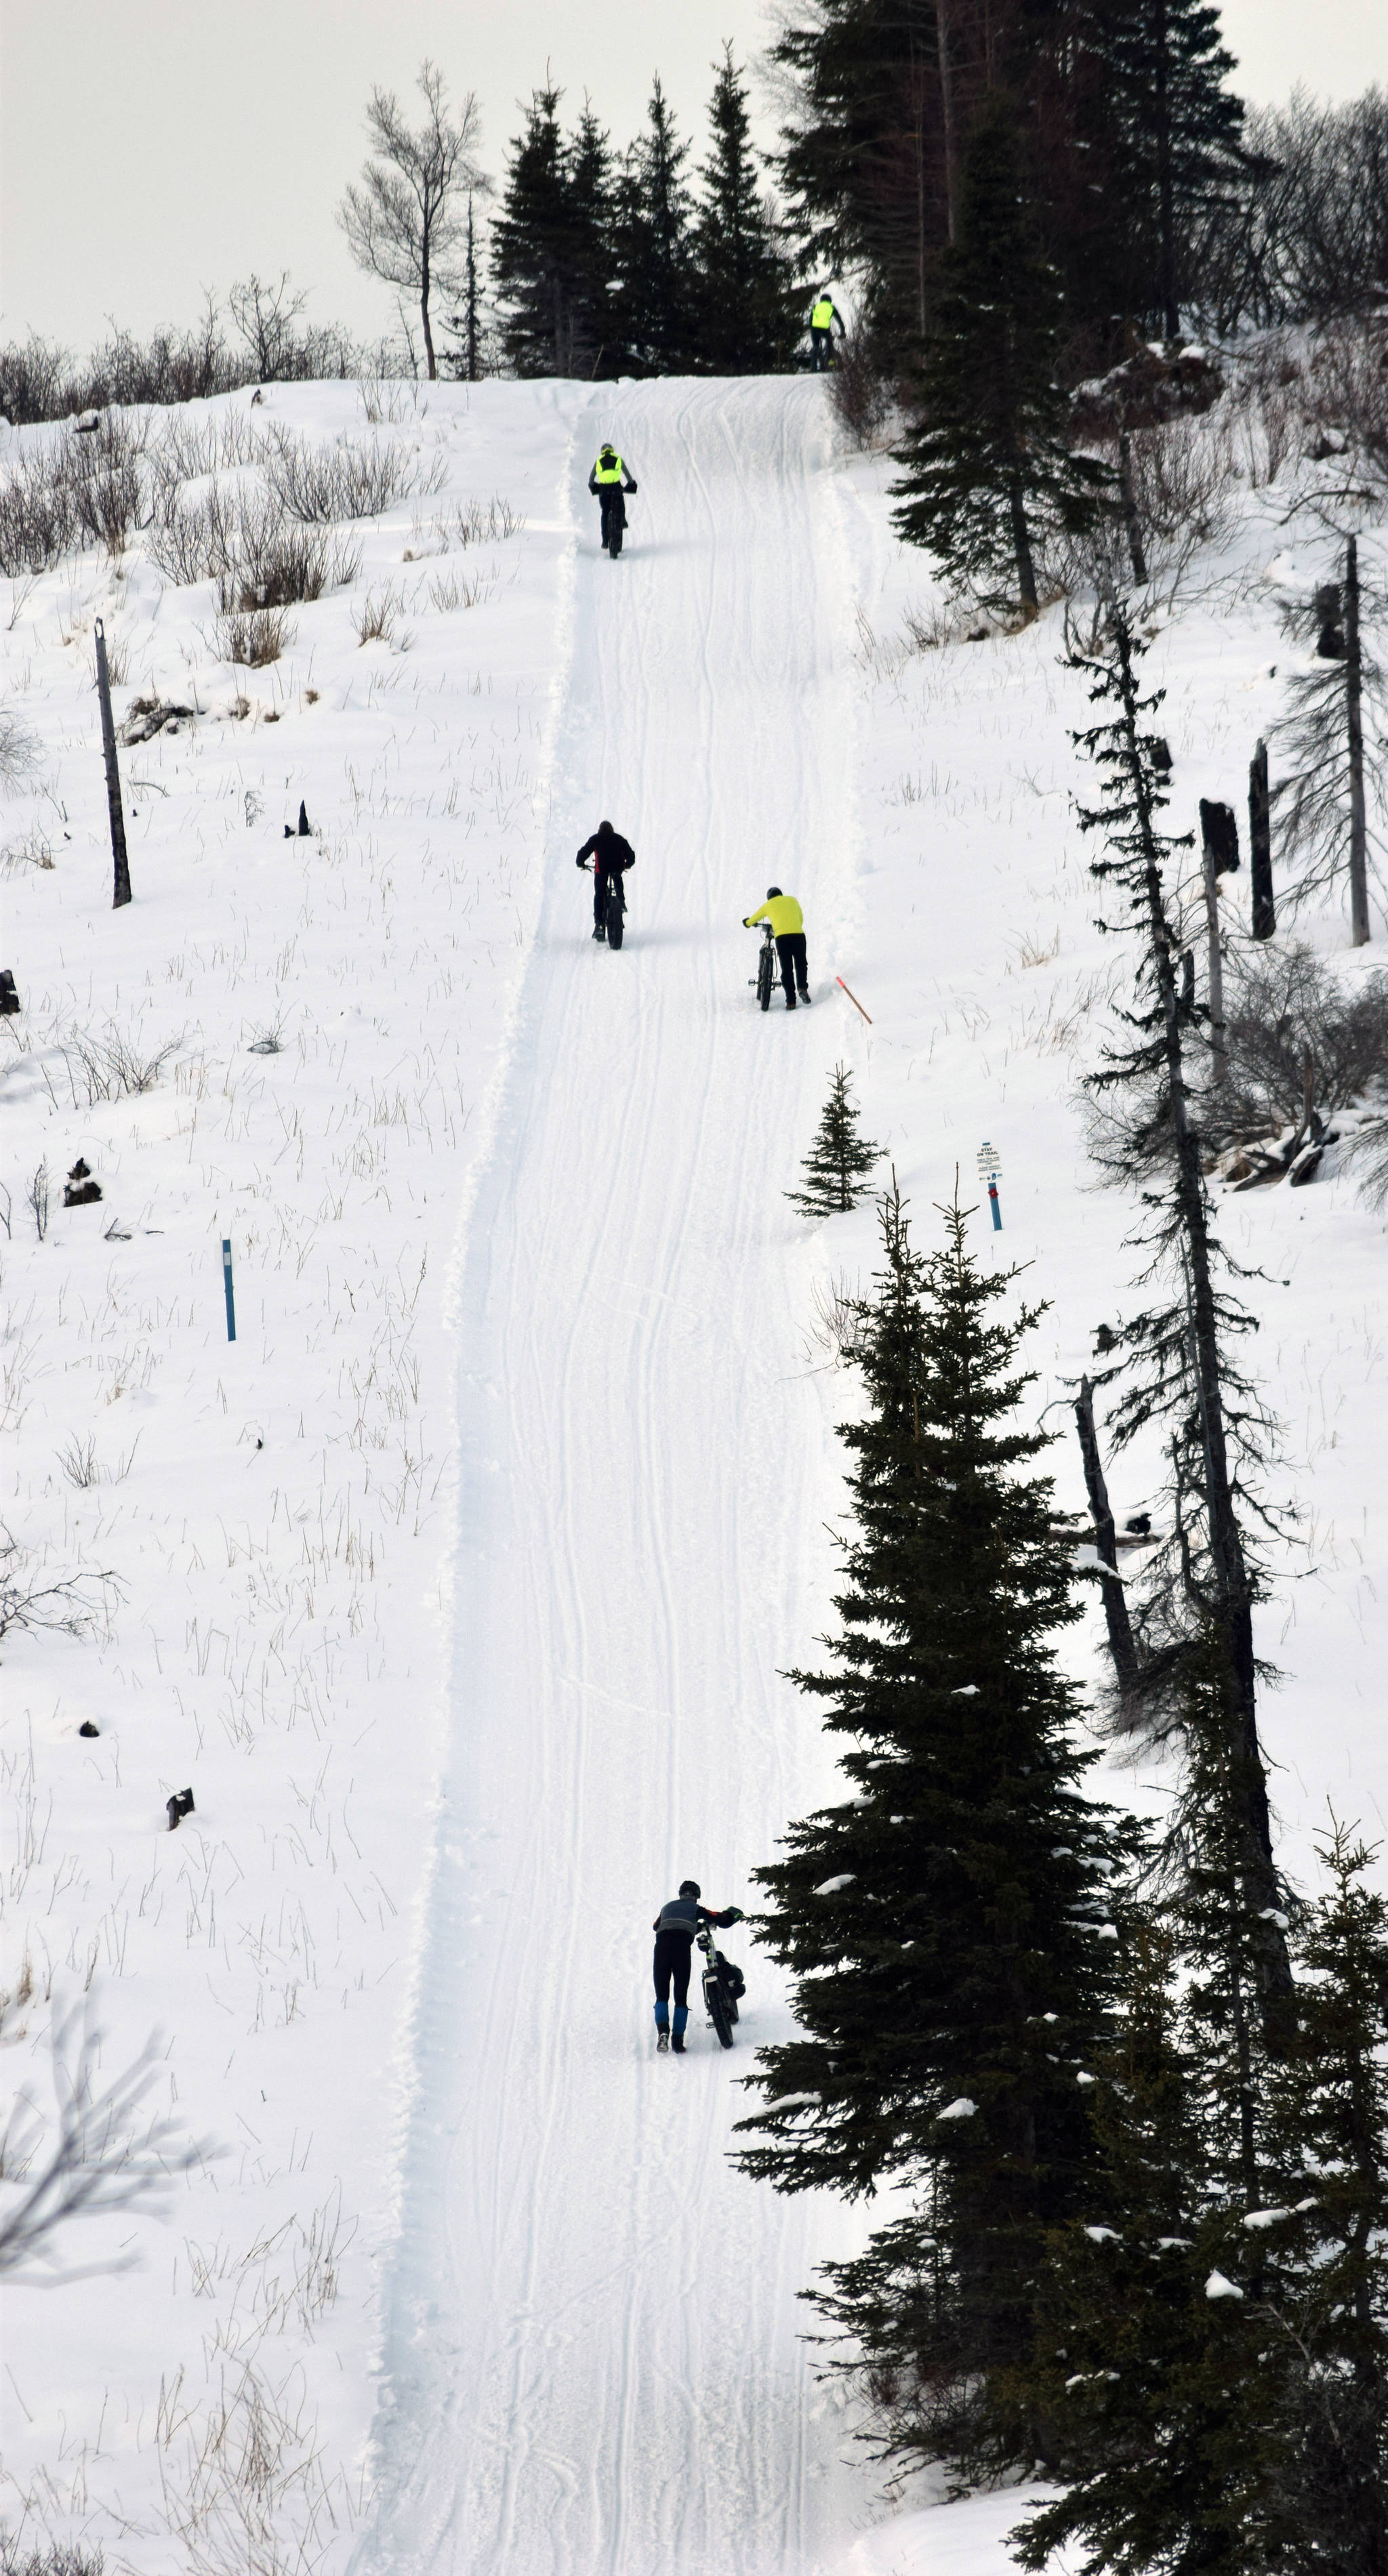 A hill challenges racers during Fat Freddie’s Bike Race and Ramble on Saturday, Feb. 9, 2019, in the Caribou Hills near Freddie’s Roadhouse. (Photo by Jeff Helminiak/Peninsula Clarion)